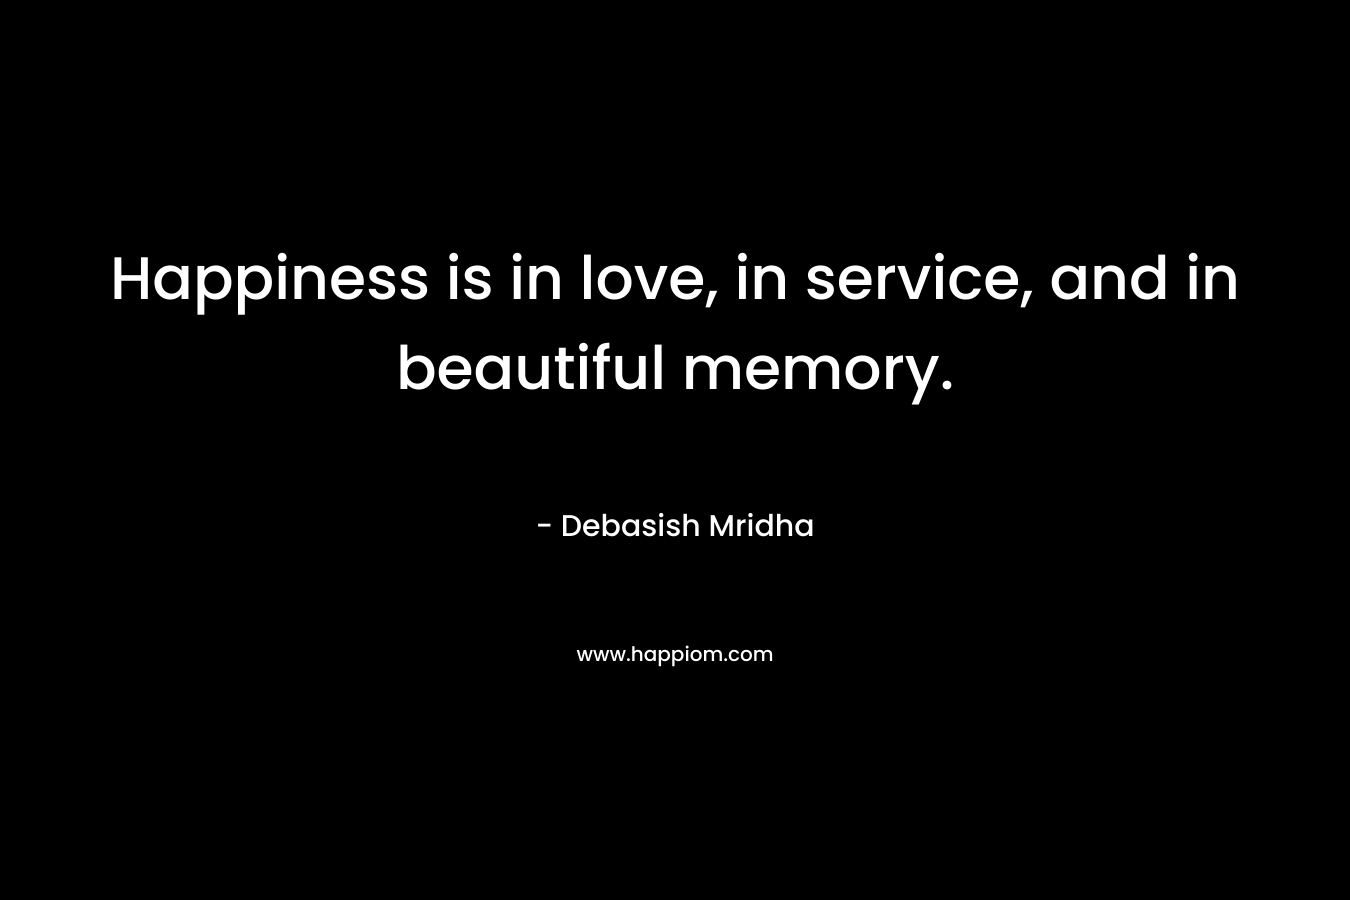 Happiness is in love, in service, and in beautiful memory.